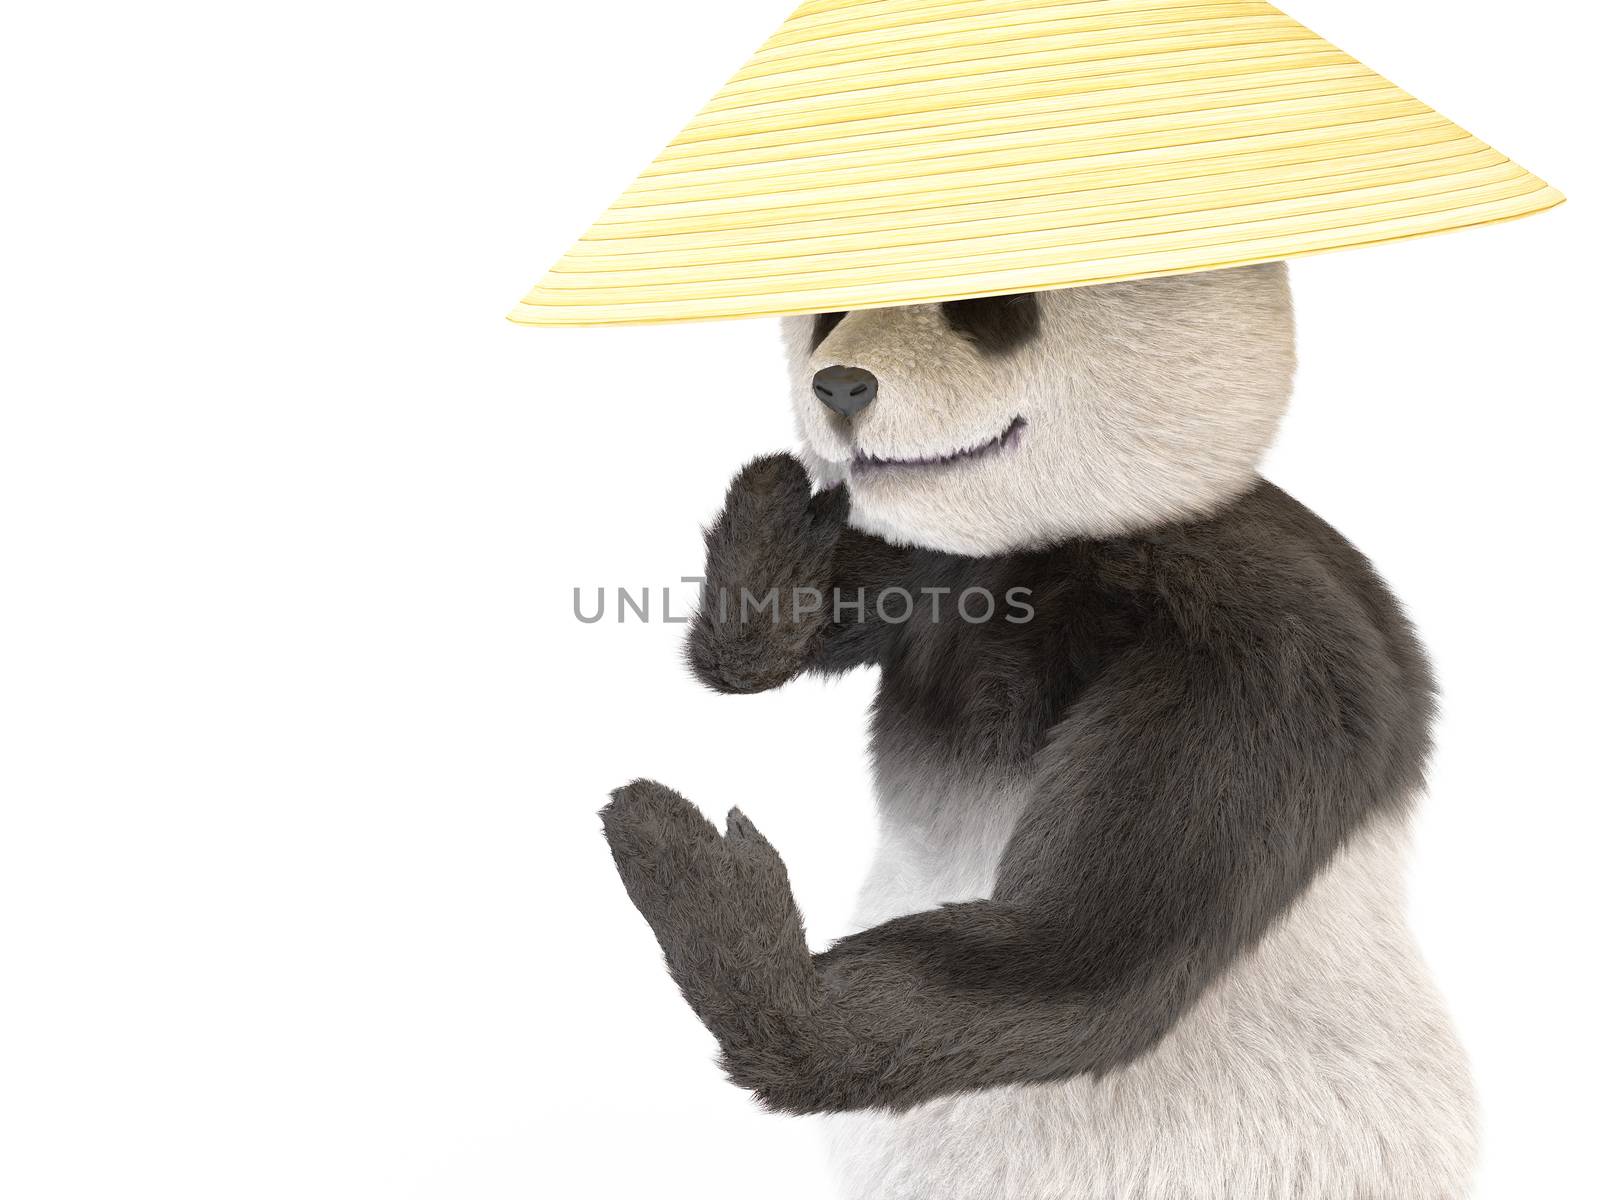 wild aggressive kung fu panda asian straw hat standing bellicose posture with his hands up. animal engaged Chinese martial arts in hat collector rice. Illustration about cute dangerous fuzzy bear